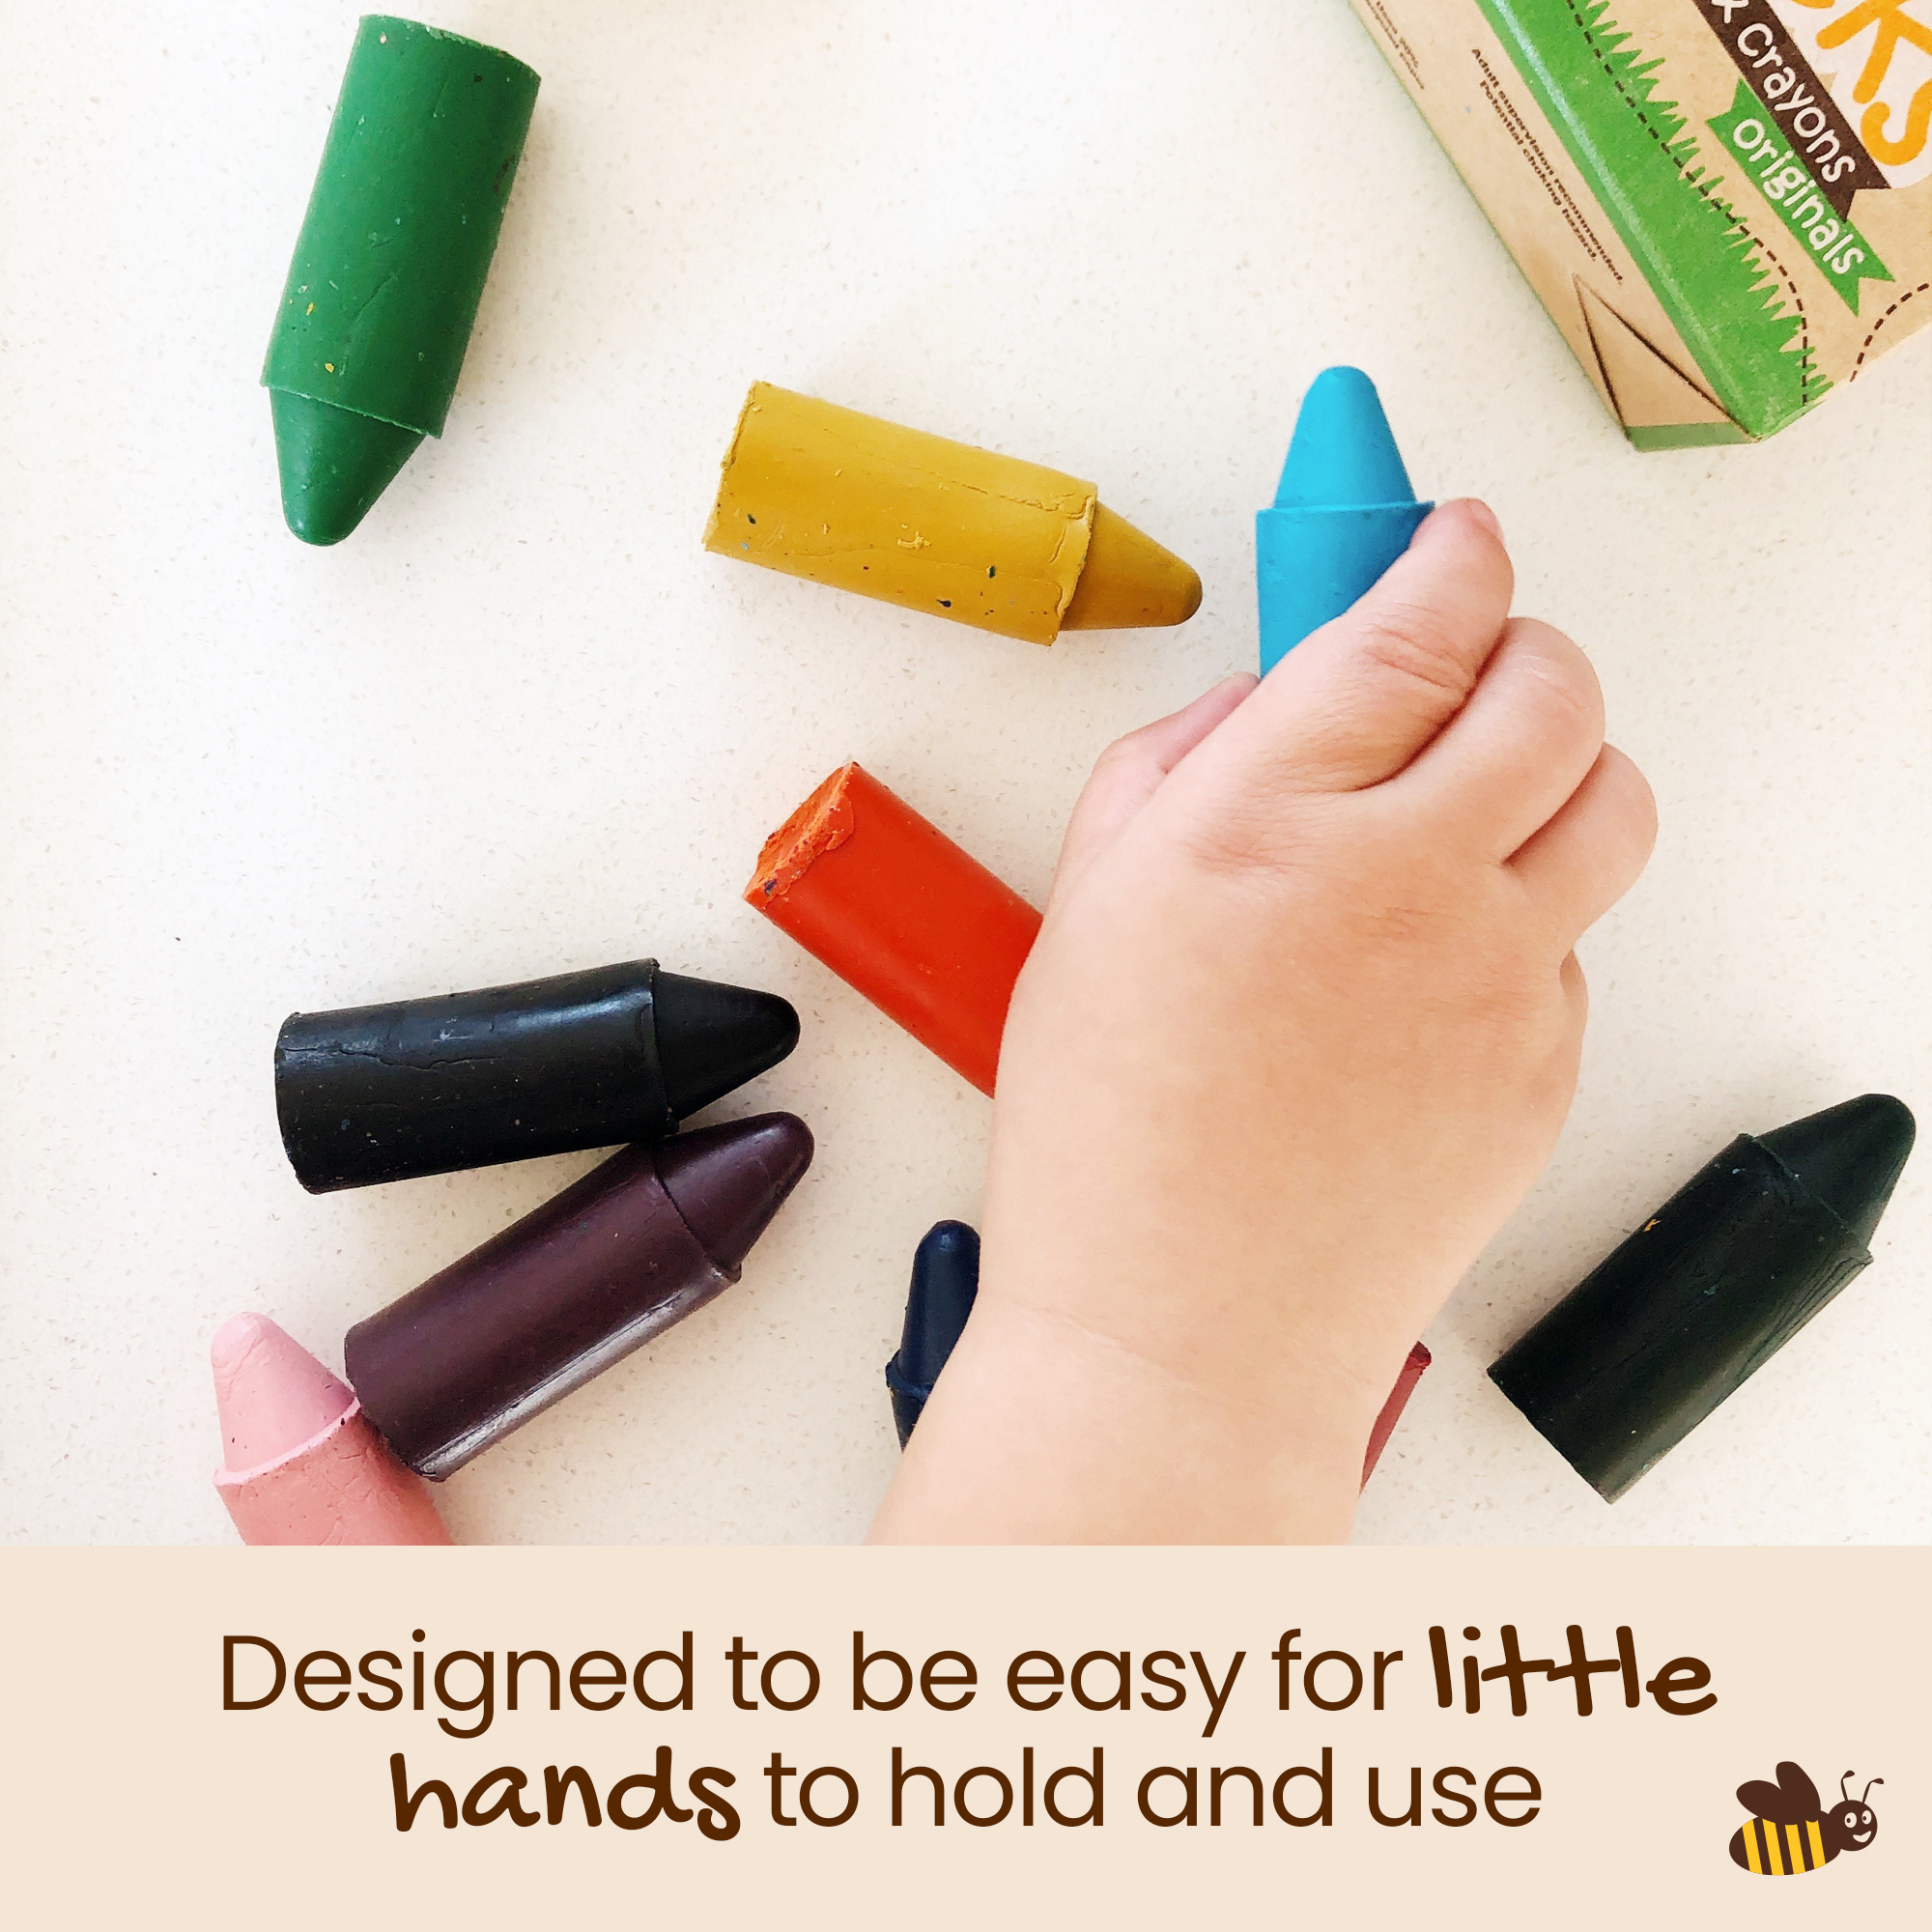 Honeysticks 100% Pure Beeswax Crayons (12 Pack) - Non Toxic Crayons Handmade with Natural Beeswax and Food Grade Colours - Child / Toddler Safe, Easy to Hold and Use - Sustainably Made in New Zealand - image 3 of 6